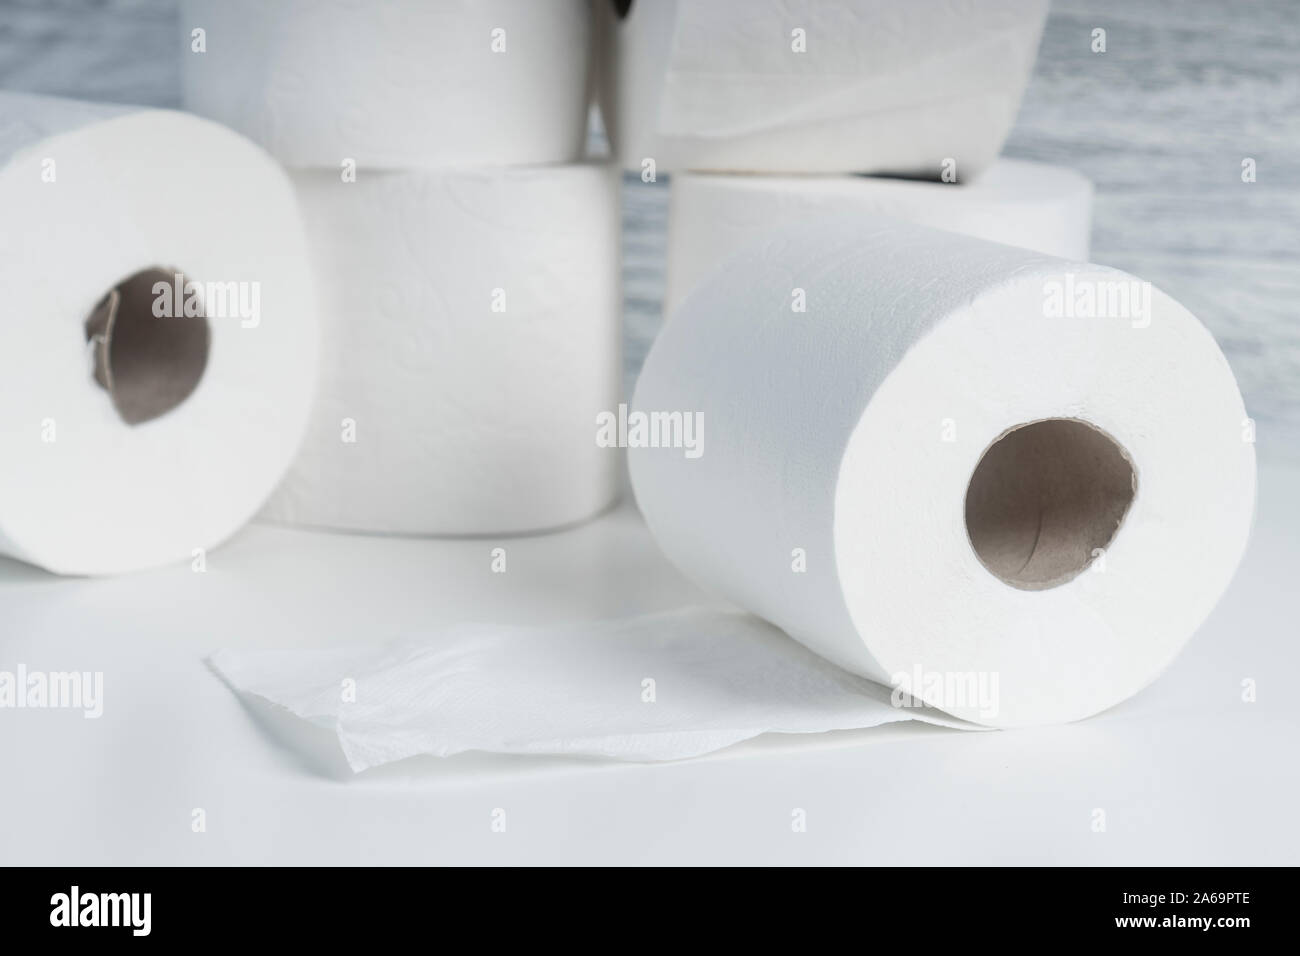 A pile of toilet paper rolls on a white table on a background of blue ...